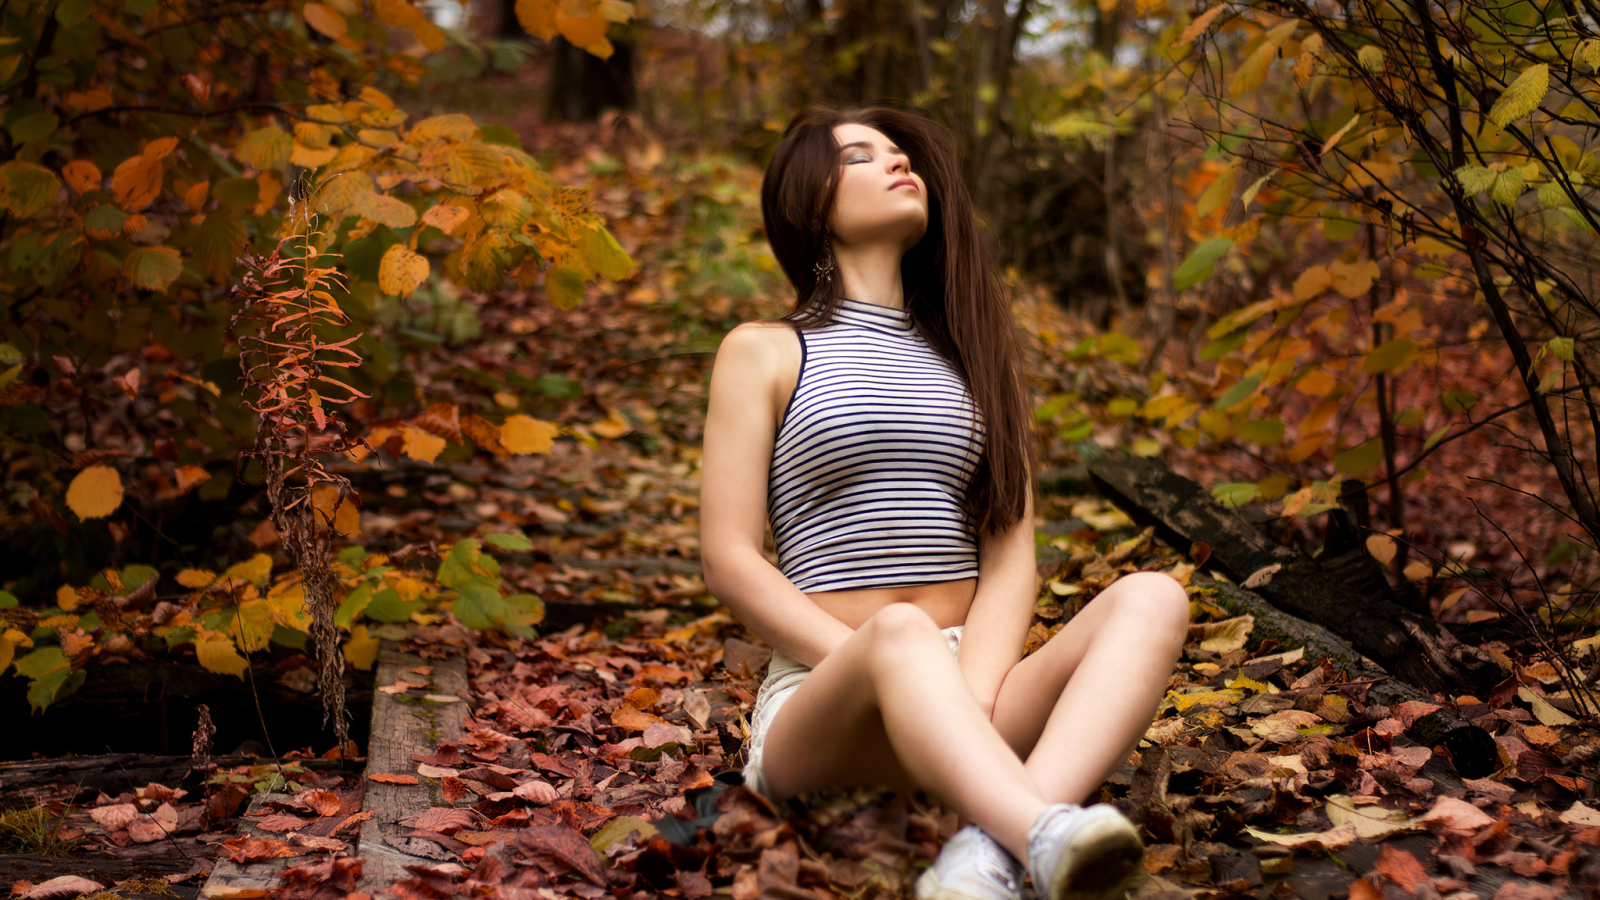 girl, beautiful, sexy, sneakers, legs, brunette, forest, nature